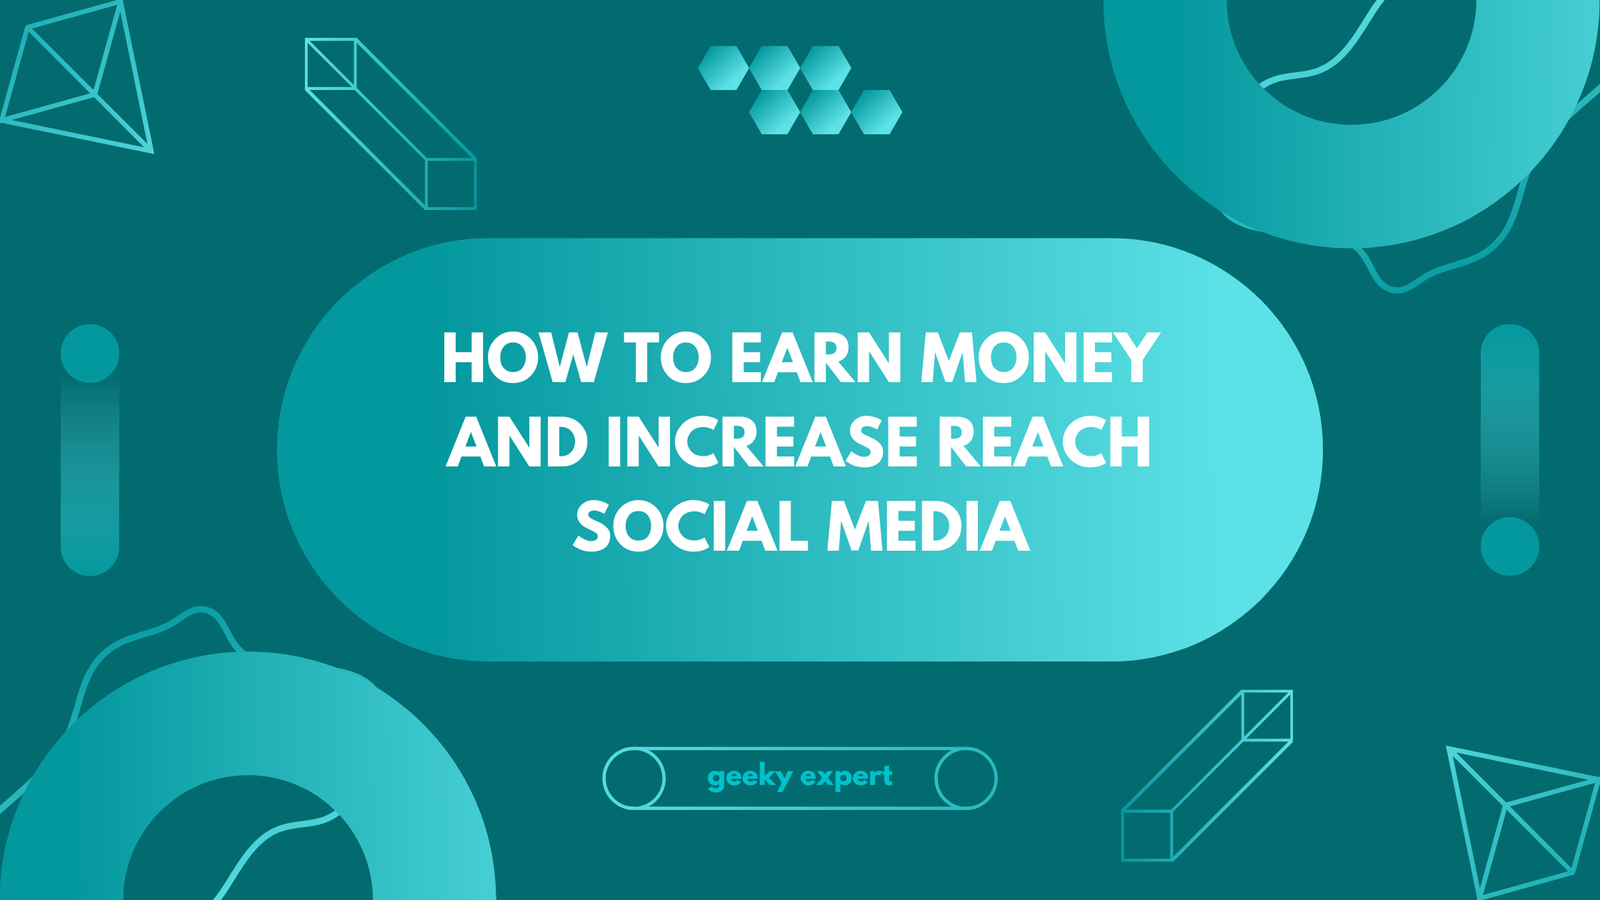 Read more about the article How to Earn Money and Increase Reach on Instagram, Facebook, Snapchat, and Other Social Media